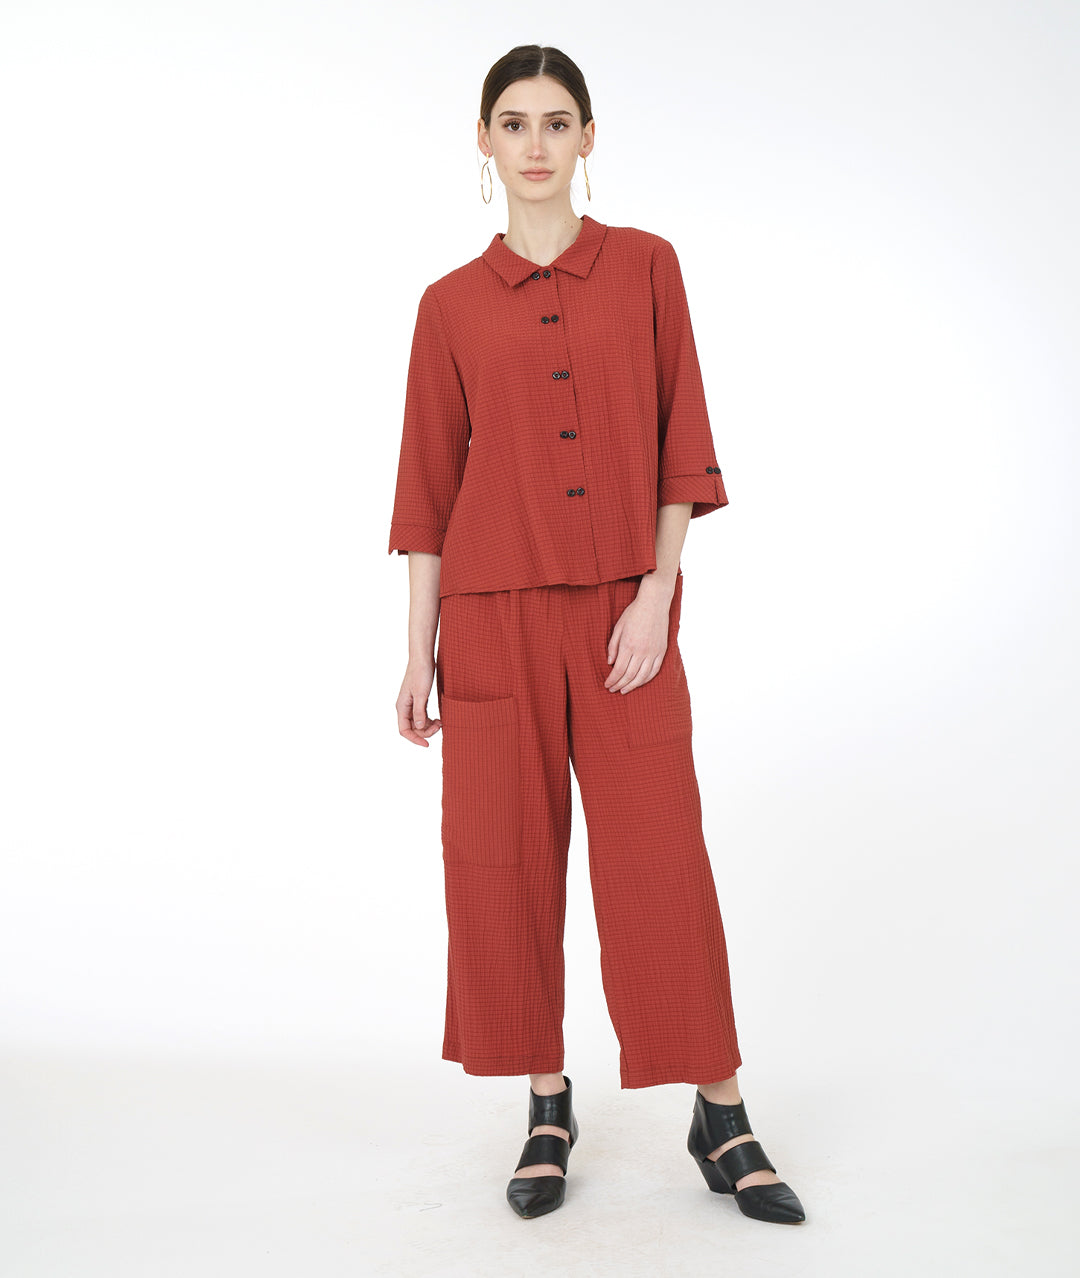 model in a sienna color pant with asymmetrical cargo pockets, worn with a matching button down top with 3/4 sleeves and a twin button detail up the front